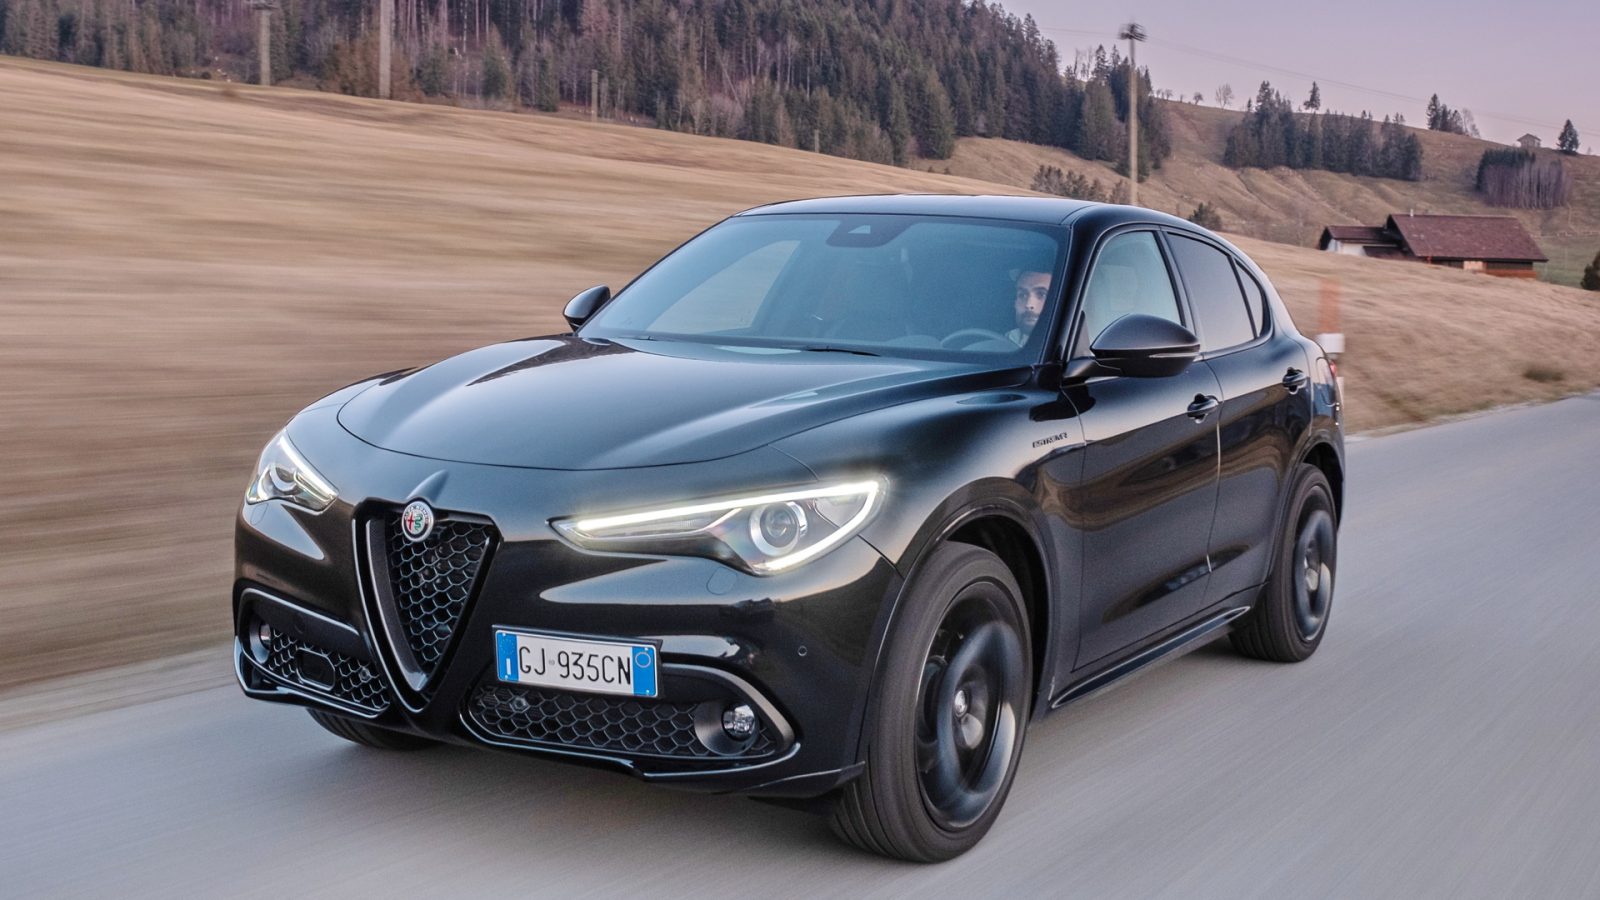 Top 5 best-selling SUVs in Italy: here is the Autohero ranking